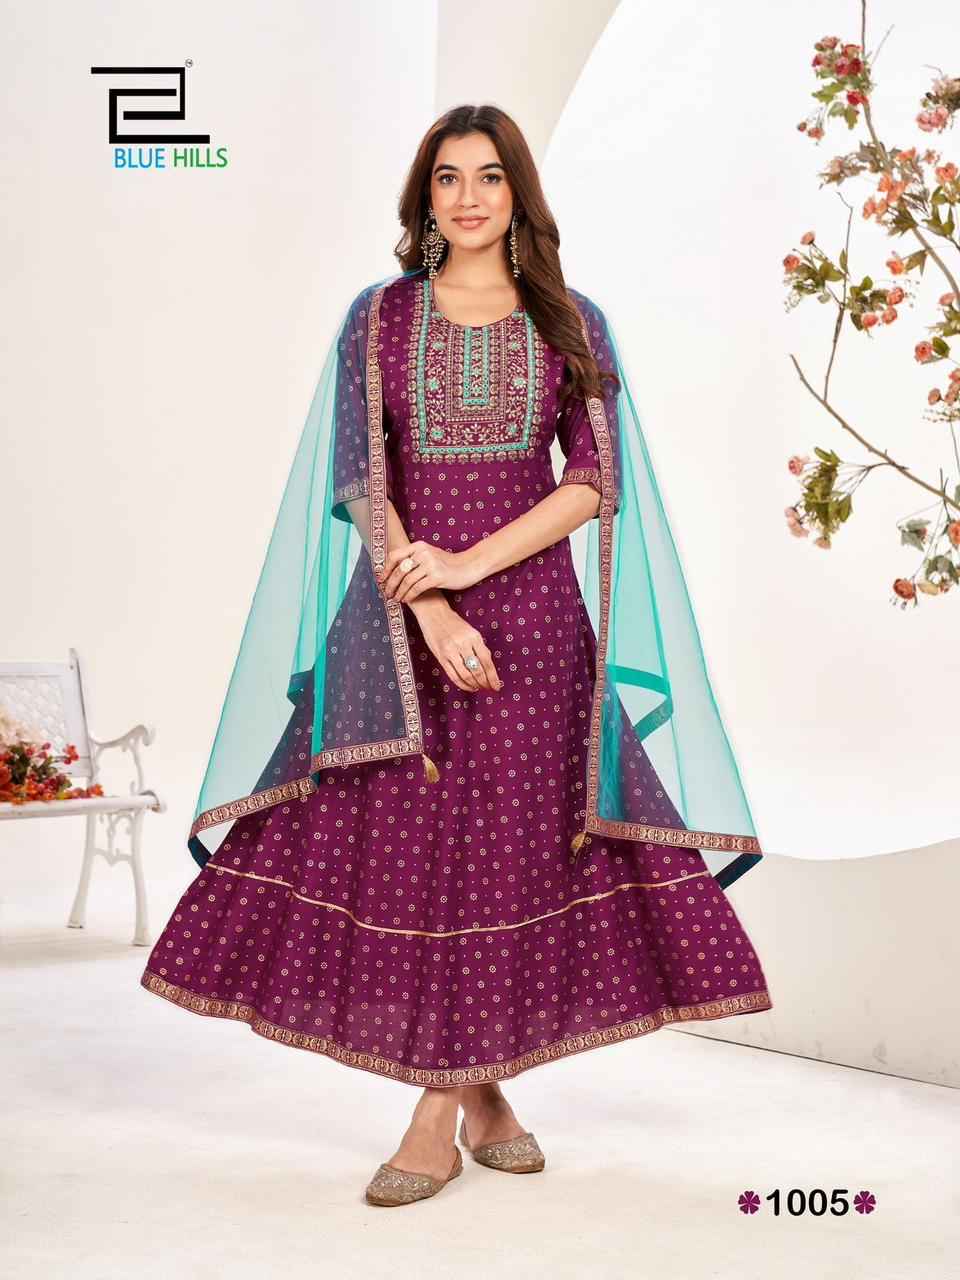 Blue Hills Manika Mage Hithe Vol 20 Rayon Gown With Dupatta 6 pcs Catalogue